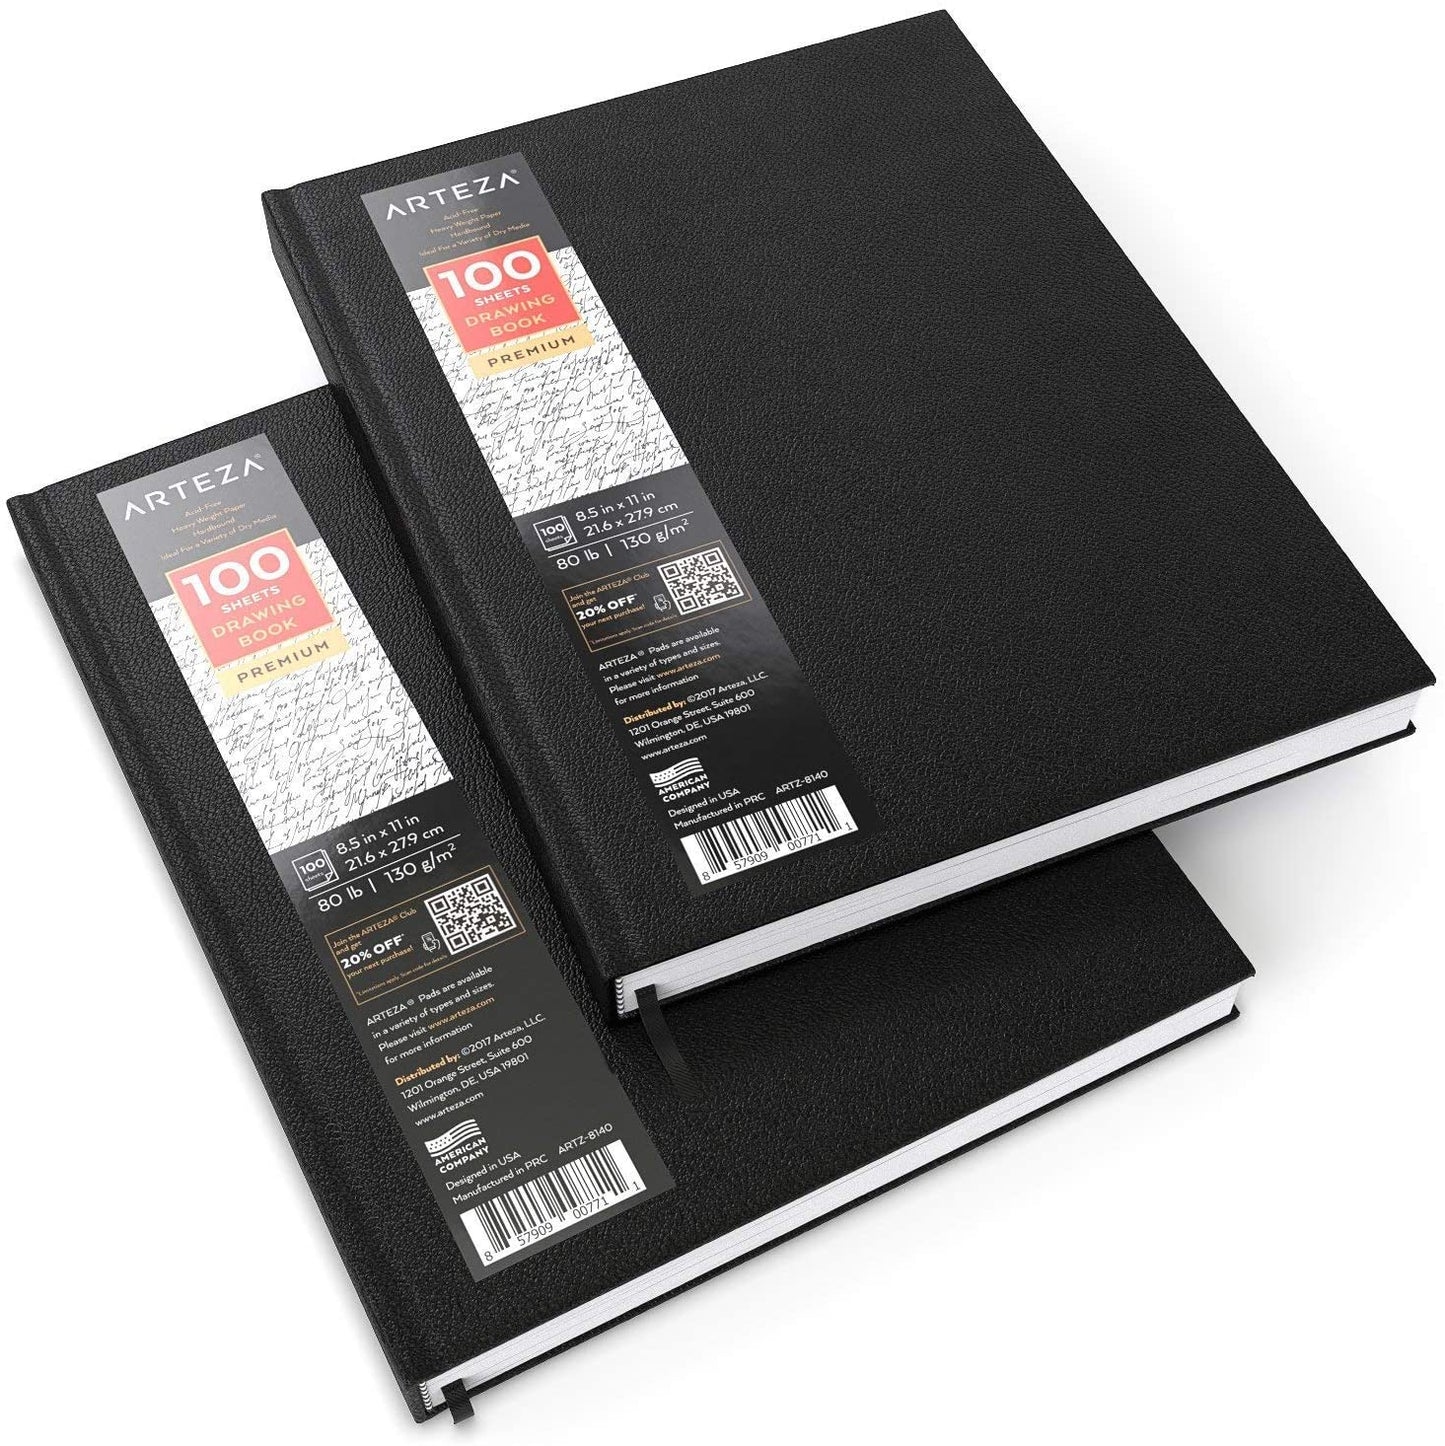 Hardcover Notebook Blank Journal Sketchbook for Drawing, Thick Paper Black